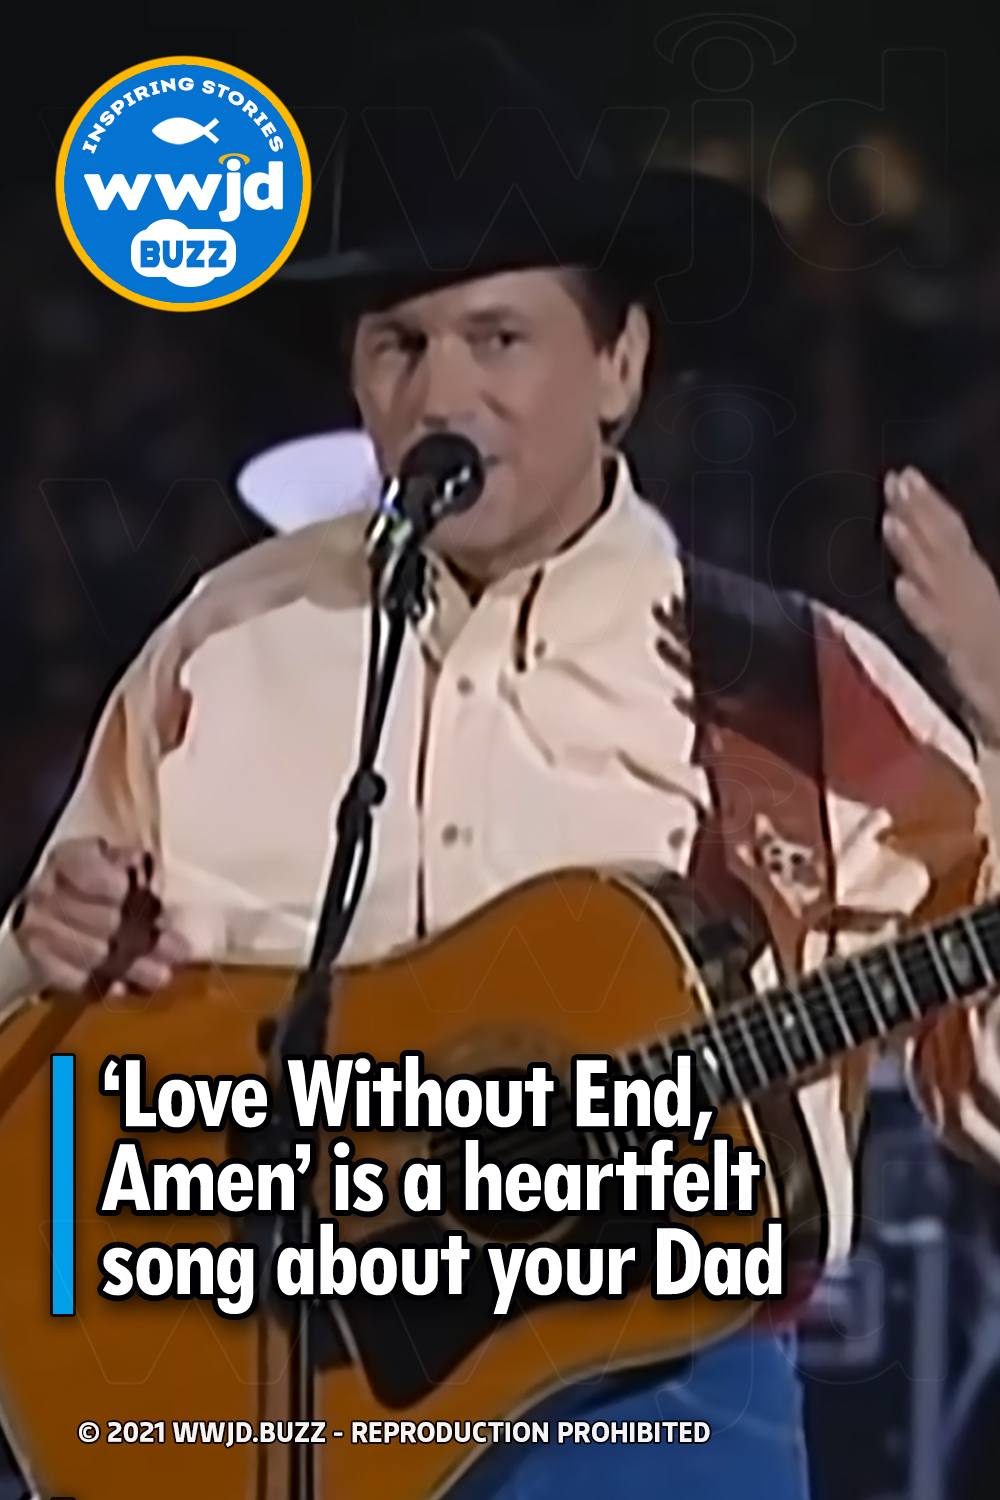 ‘Love Without End, Amen’ is a heartfelt song about your Dad